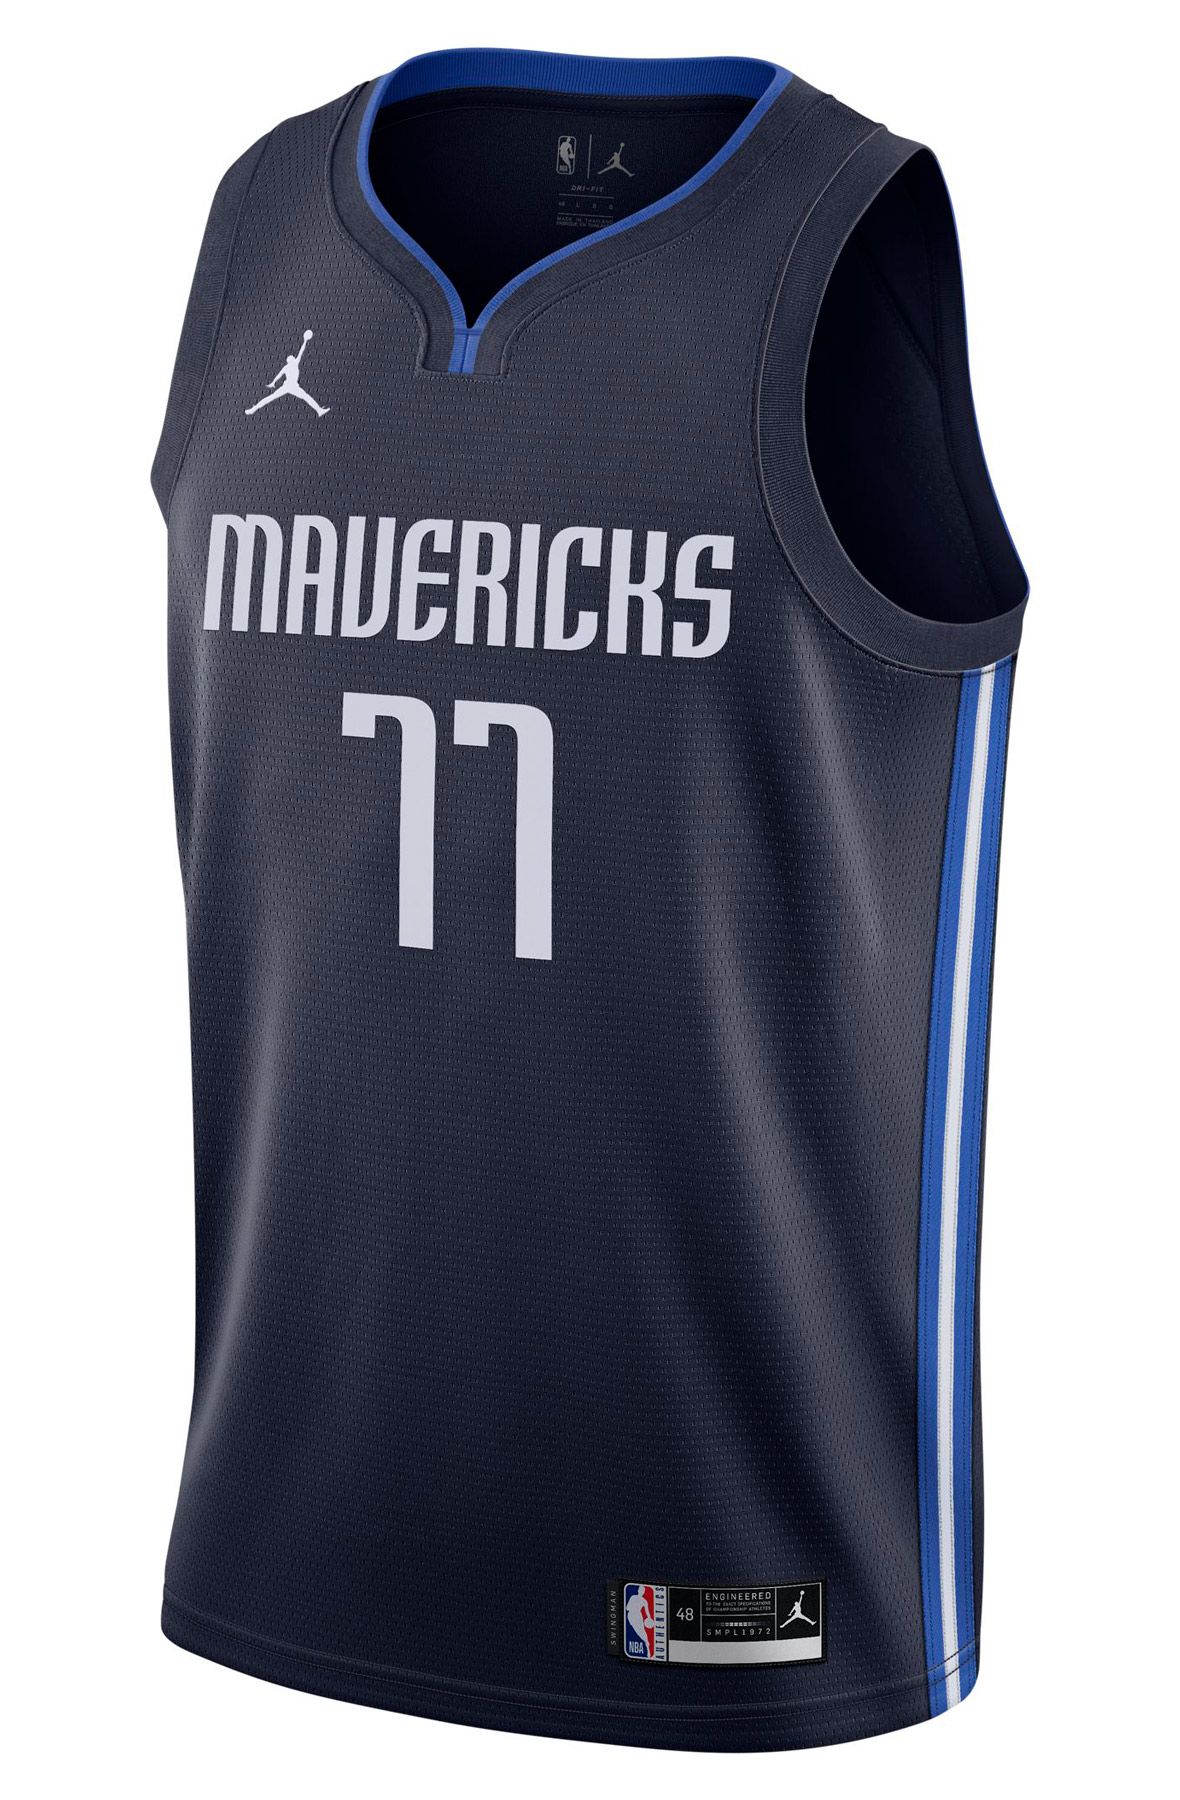 luka doncic all star jersey 2020